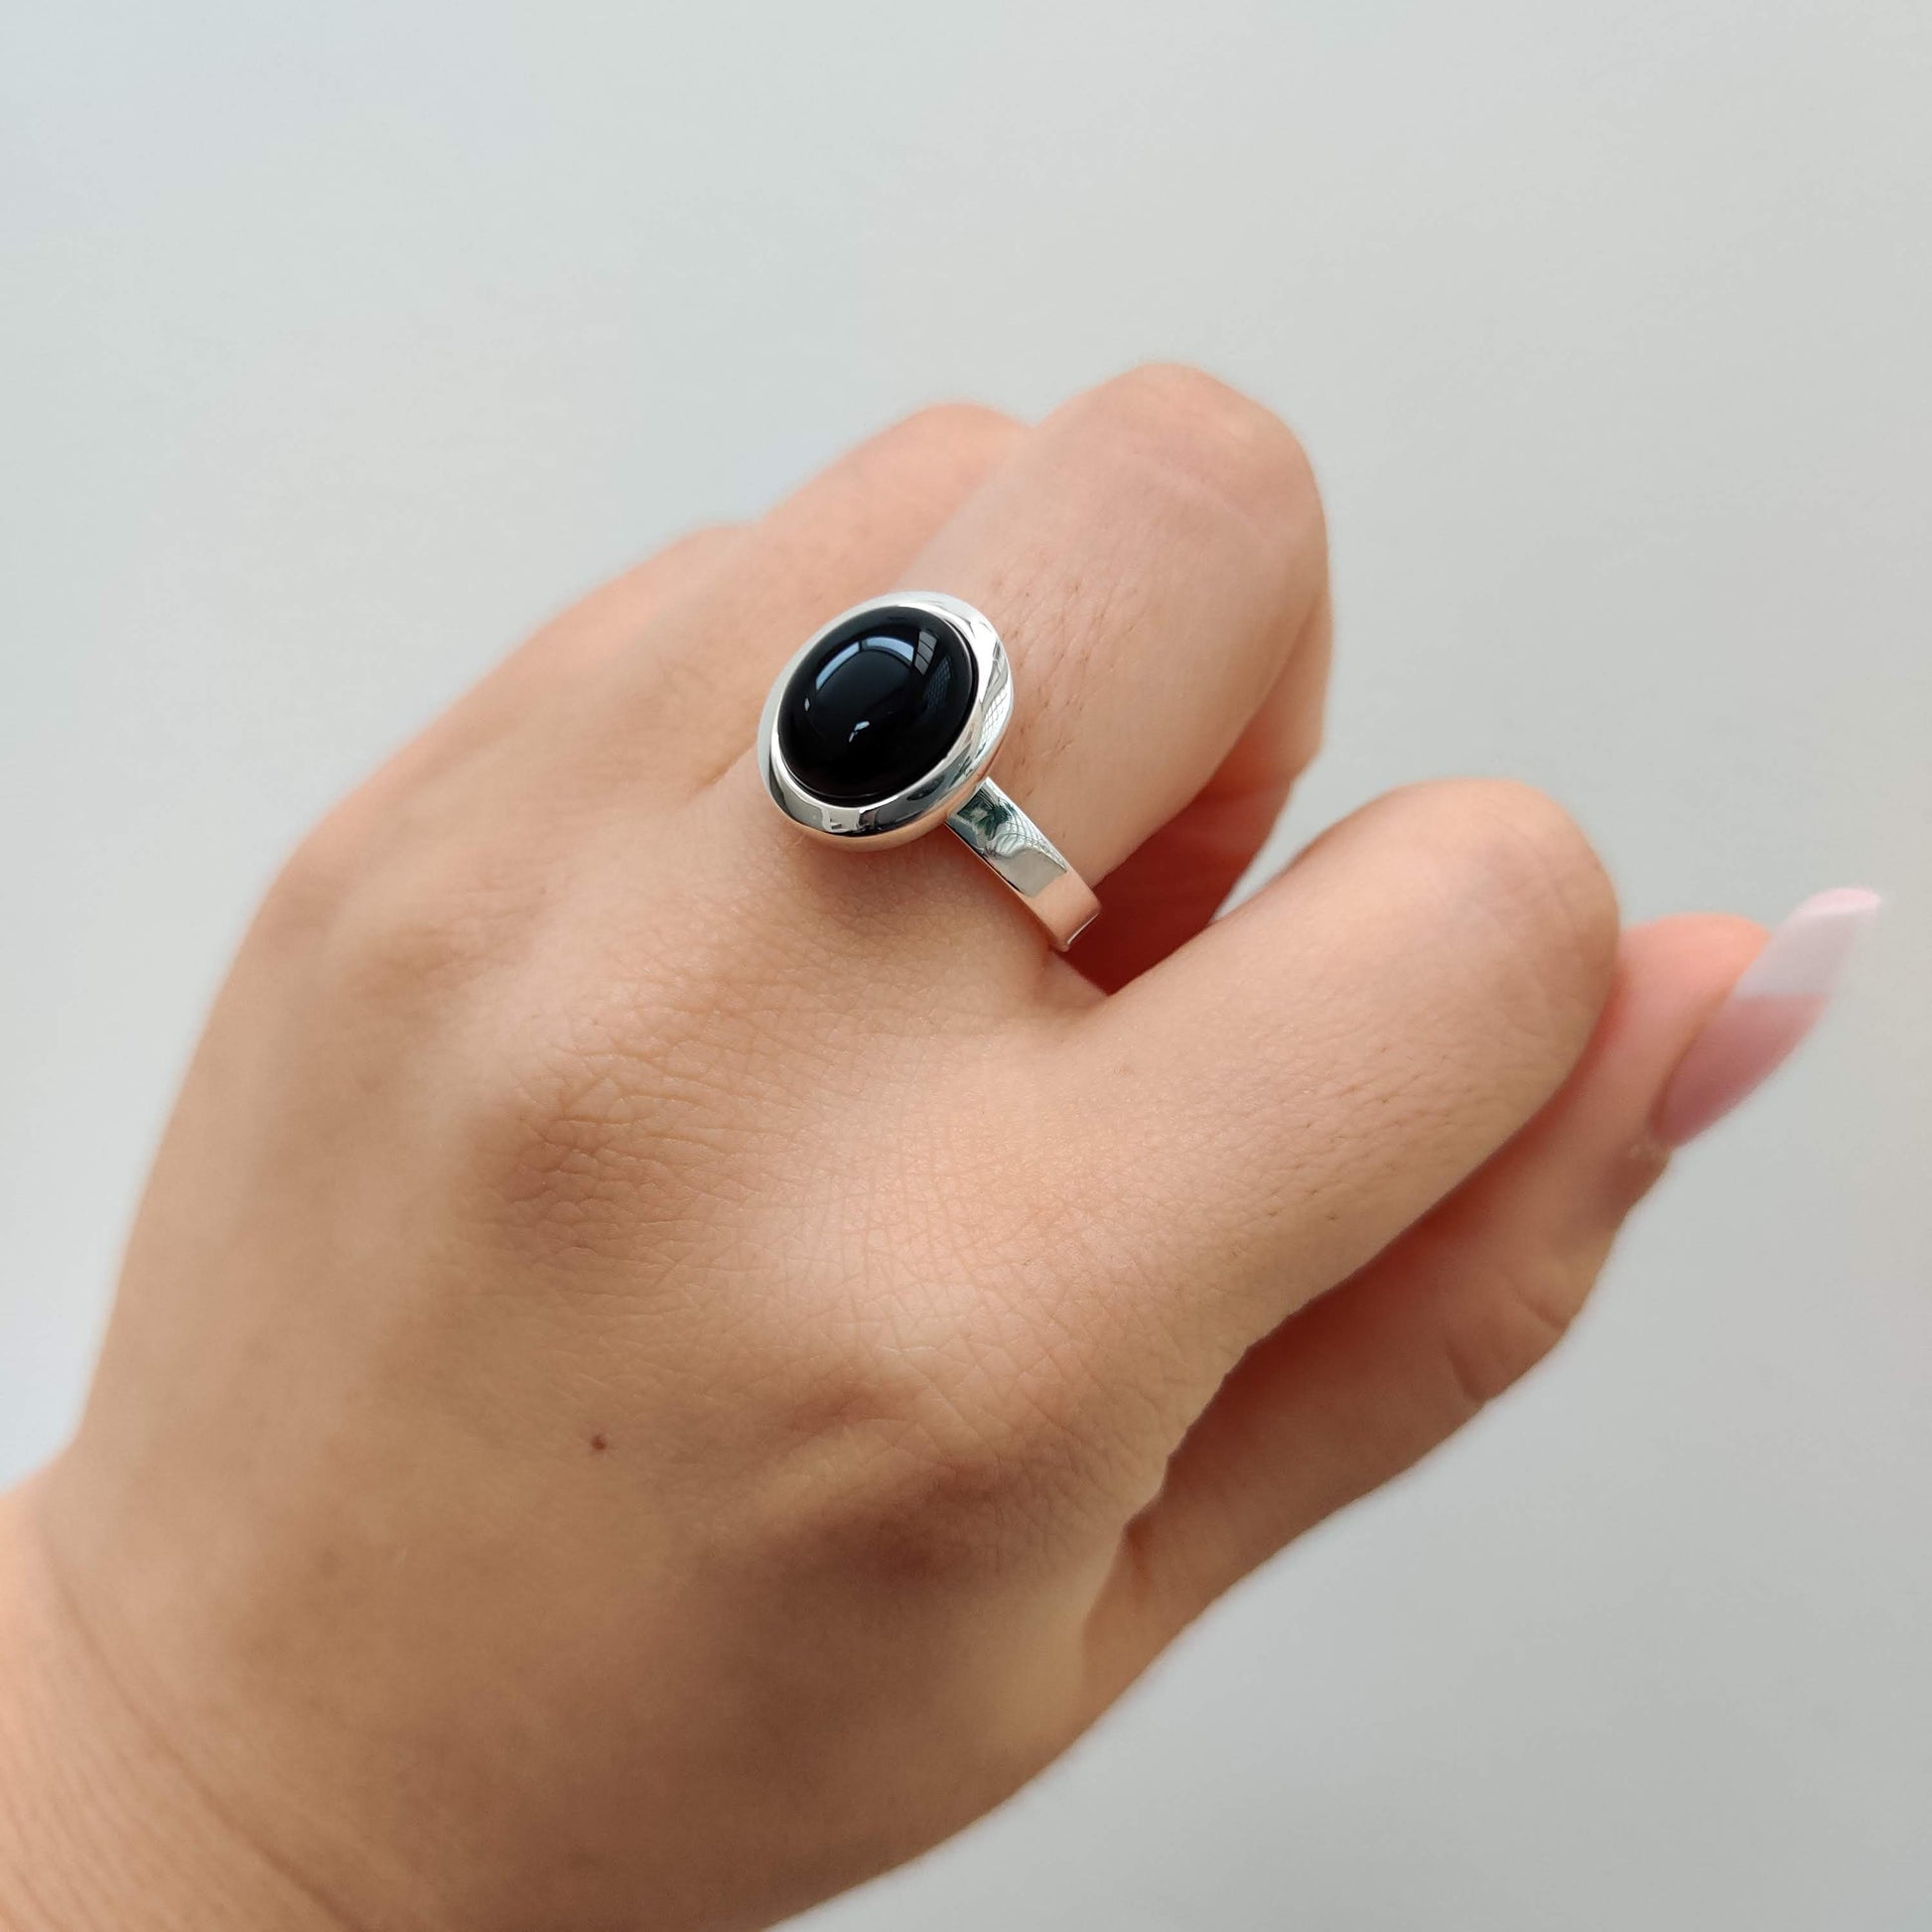 Black Onyx Oval 925 Sterling Silver Ring - Rivendell Shop